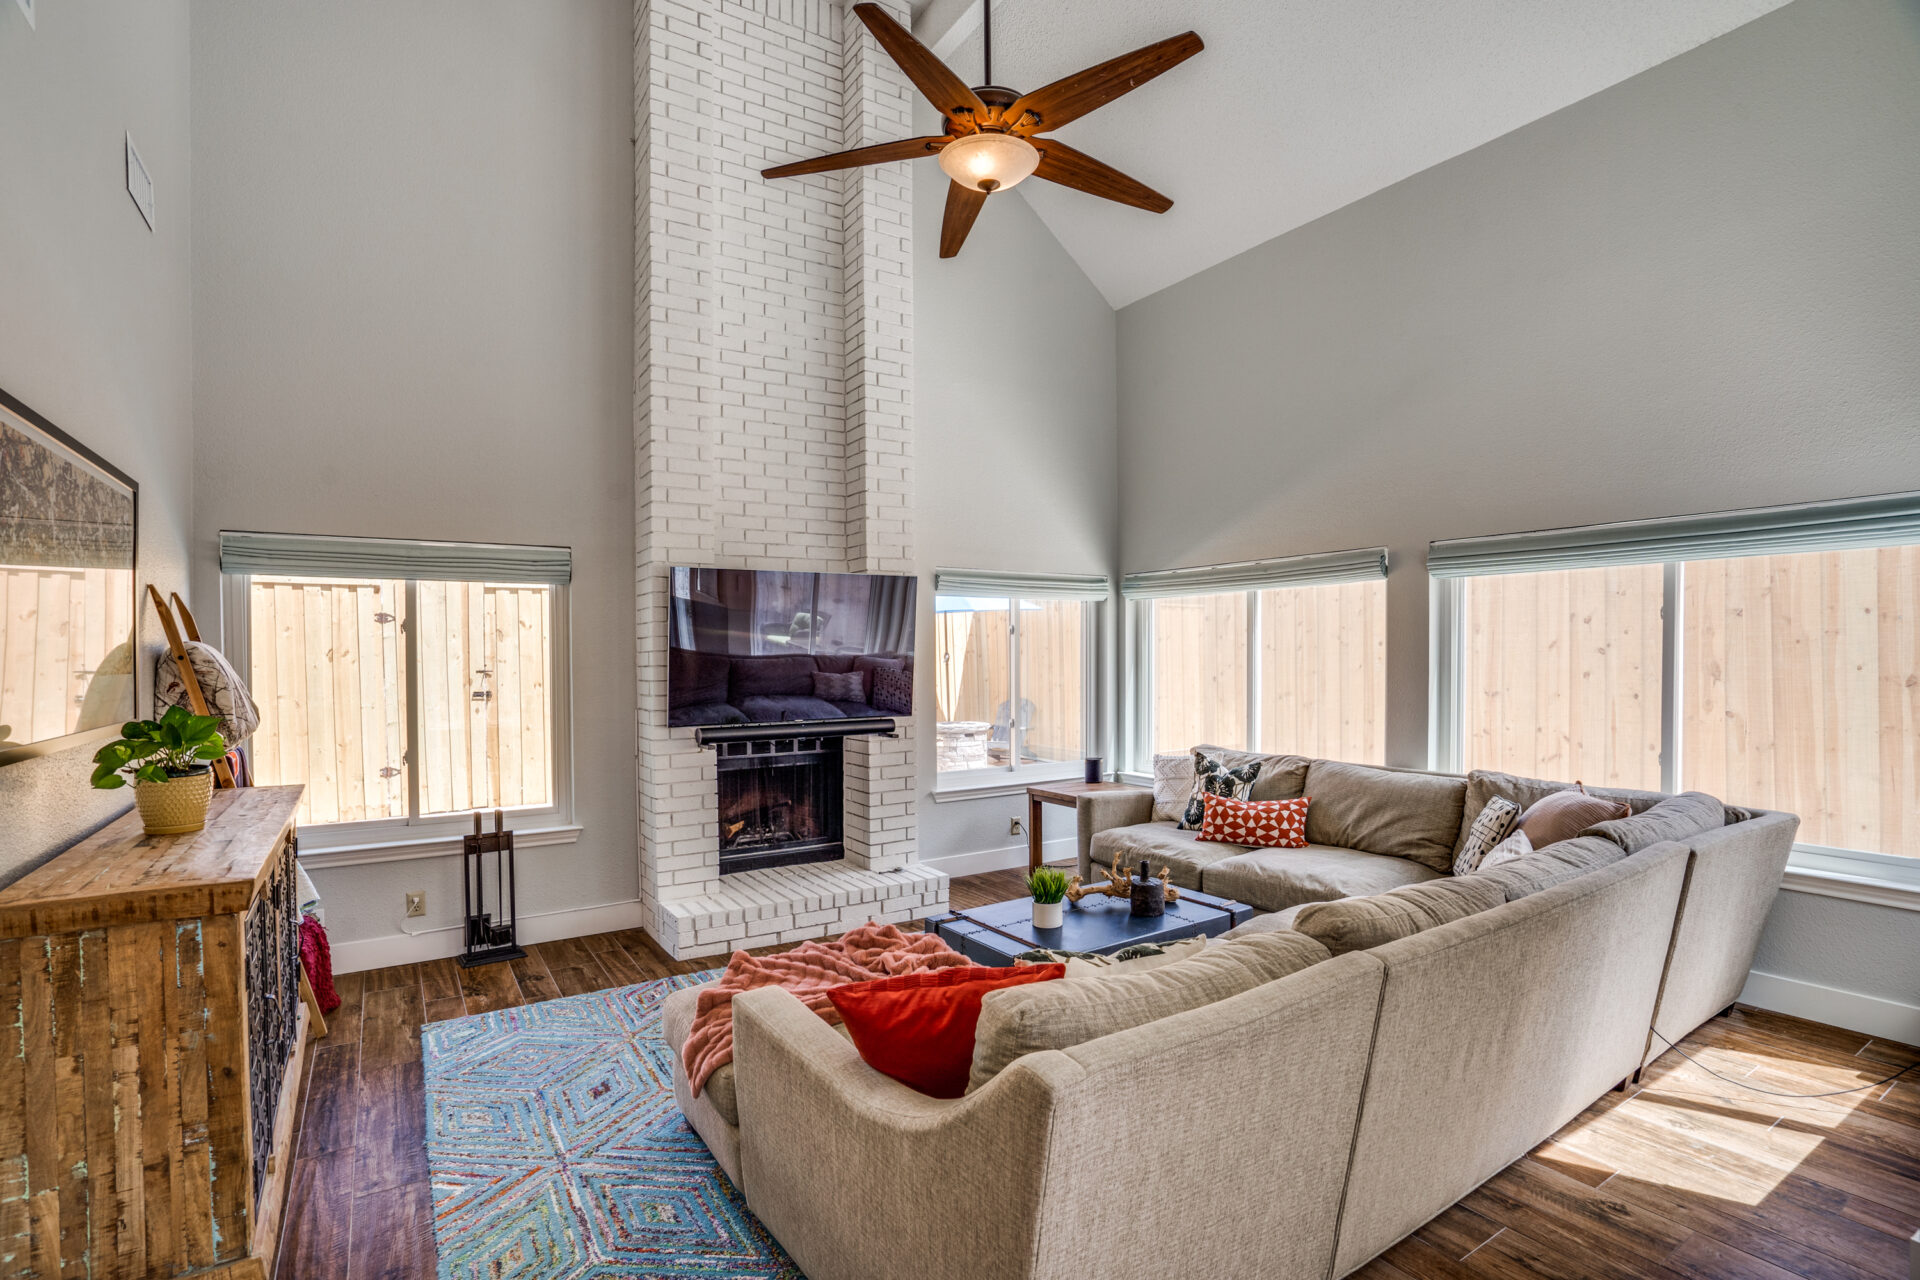 3837-canot-ln-addison-tx-75001-High-Res-2